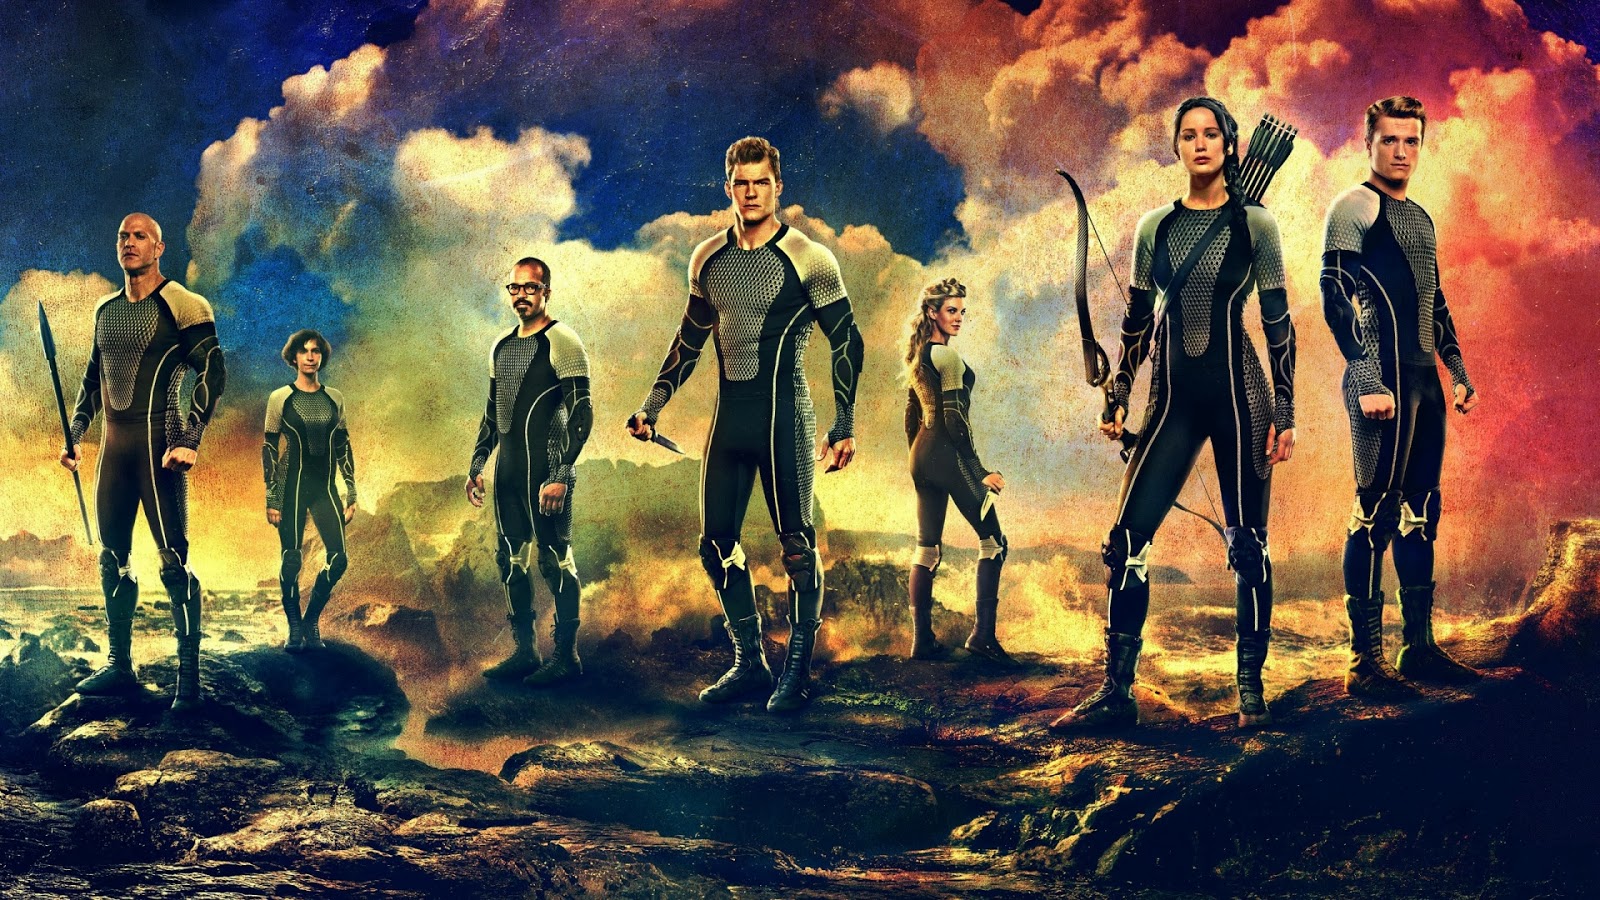 Hunger Games Catching Fire Characters Wallpaper Hiresmoall